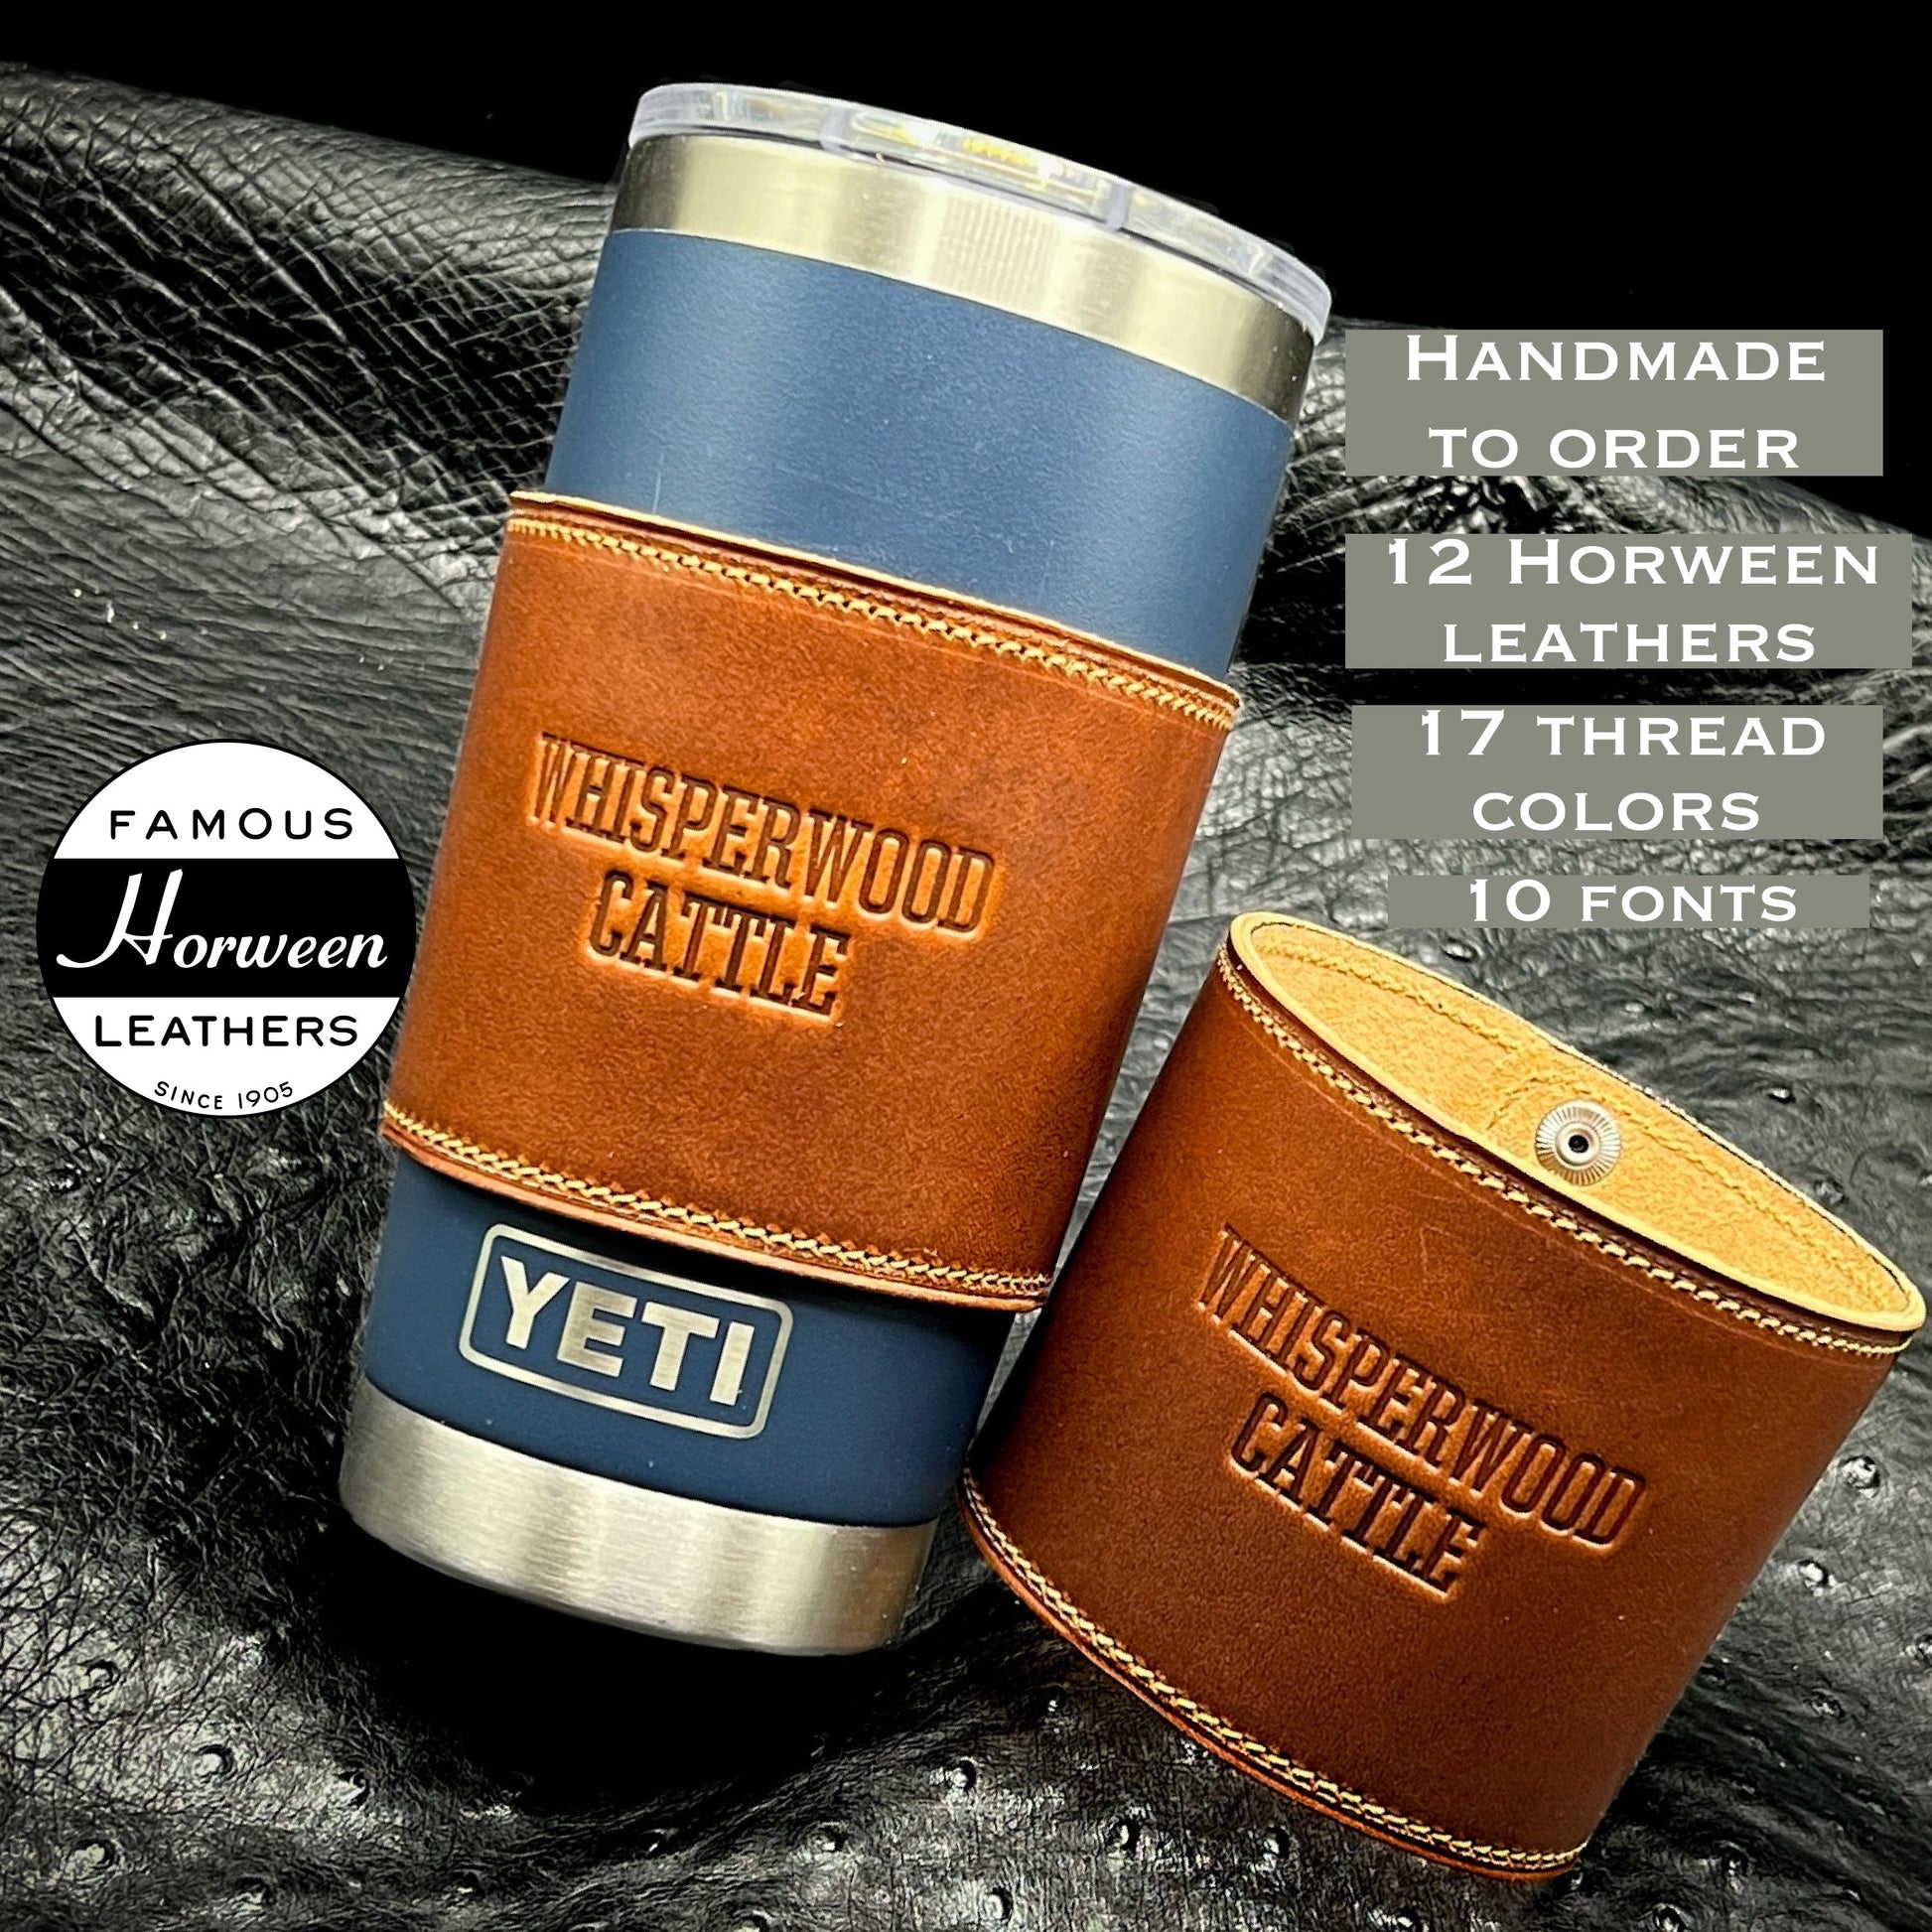 Personalized Yeti Rambler in Horween Leather | Handmade to order | Houston, TX